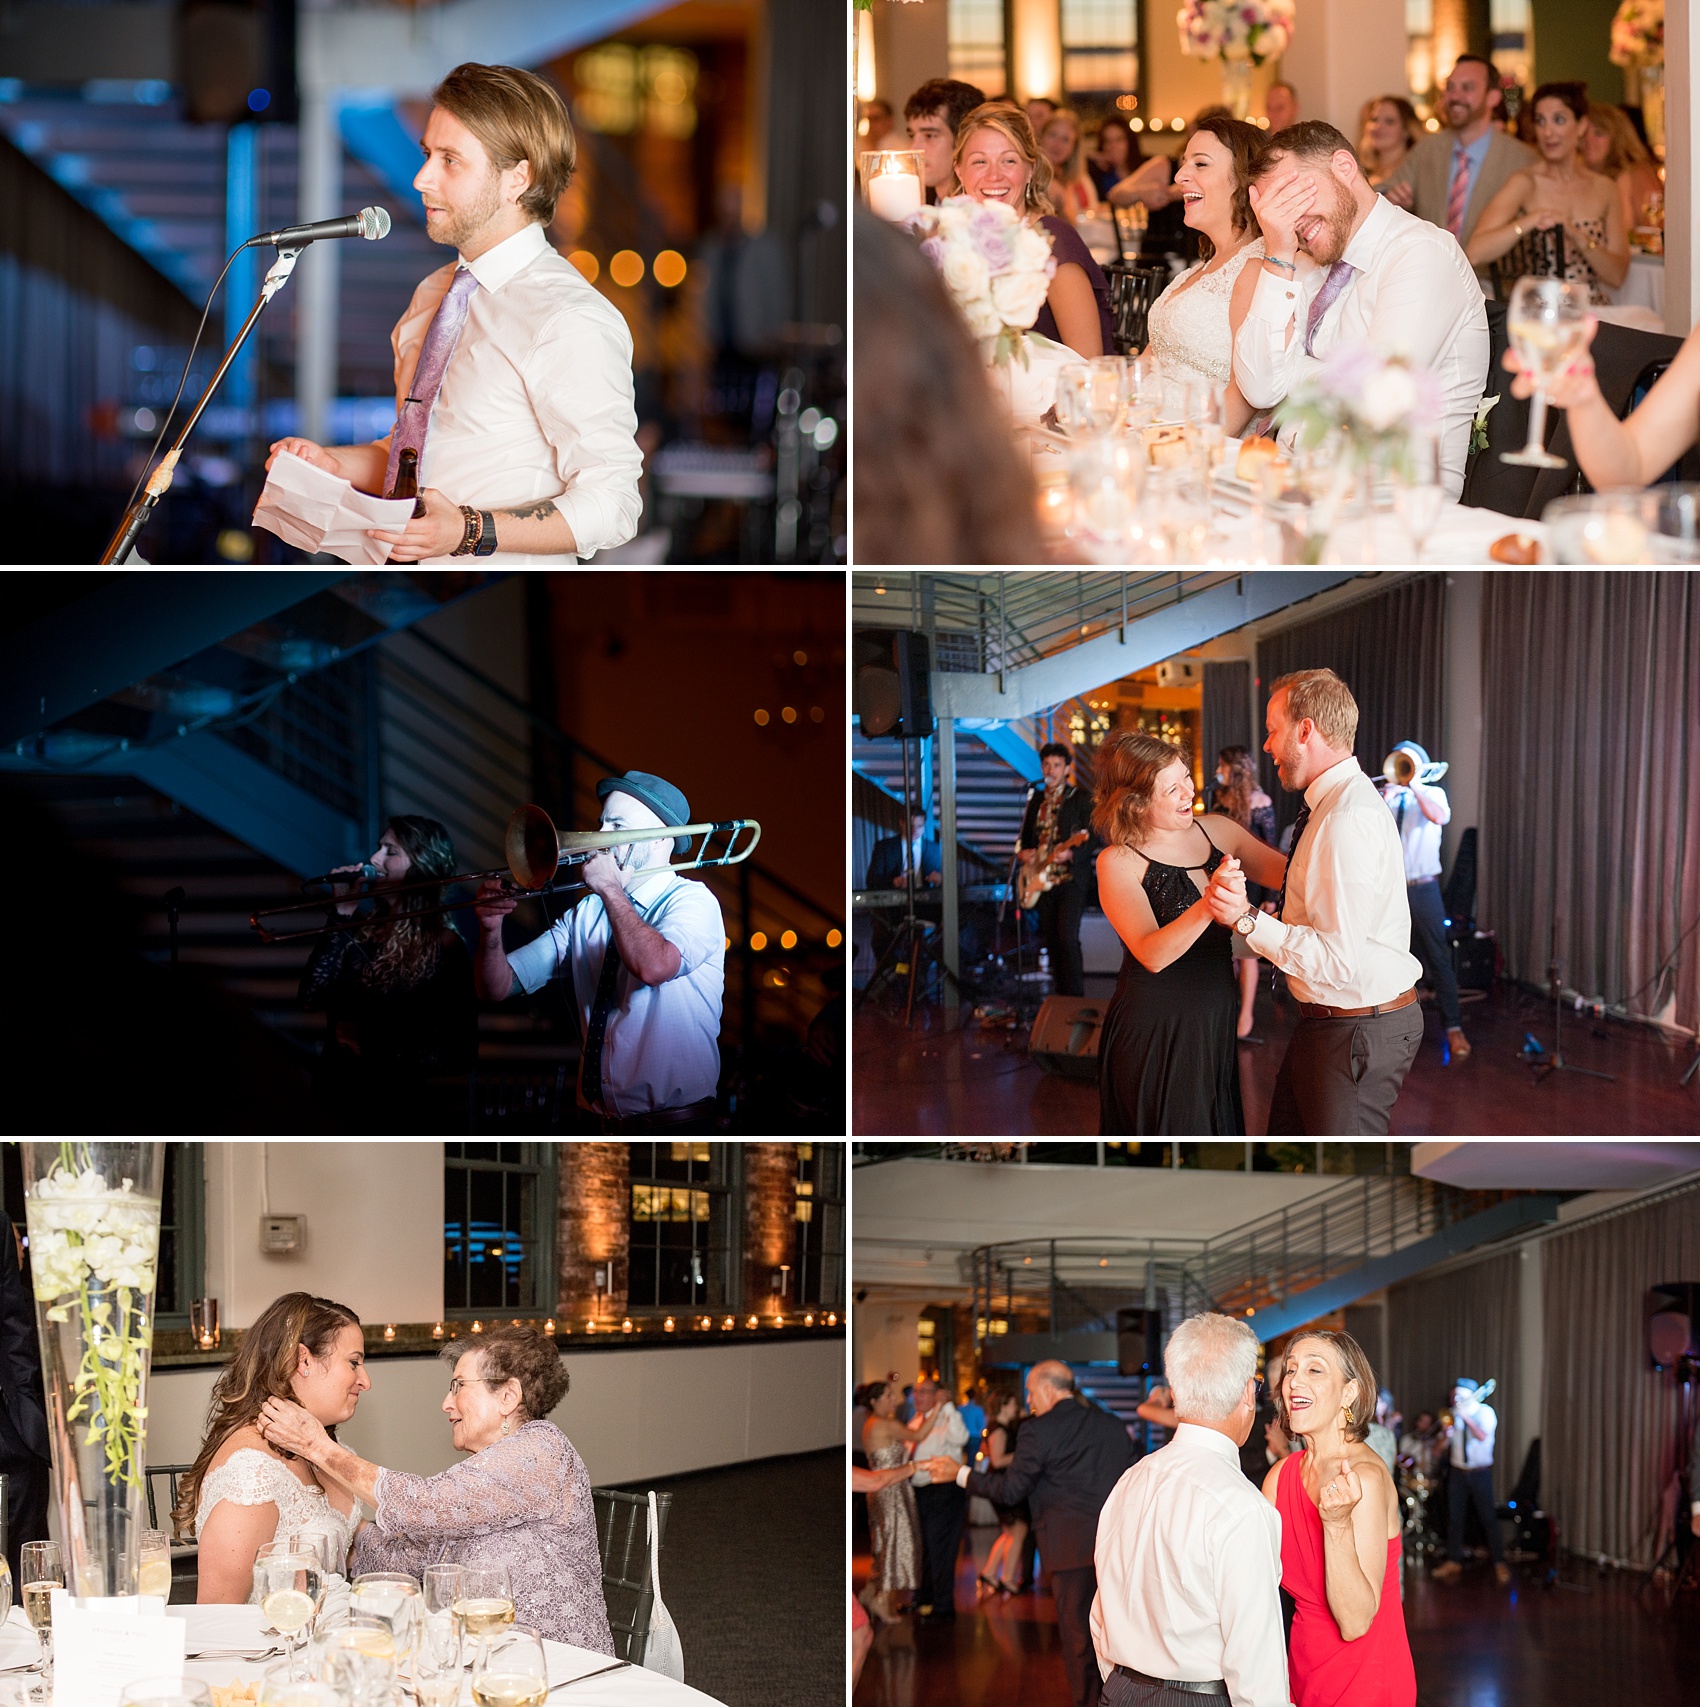 Mikkel Paige Photography photos of a NYC wedding at Tribeca Rooftop. Images of the reception dancing and conversation.